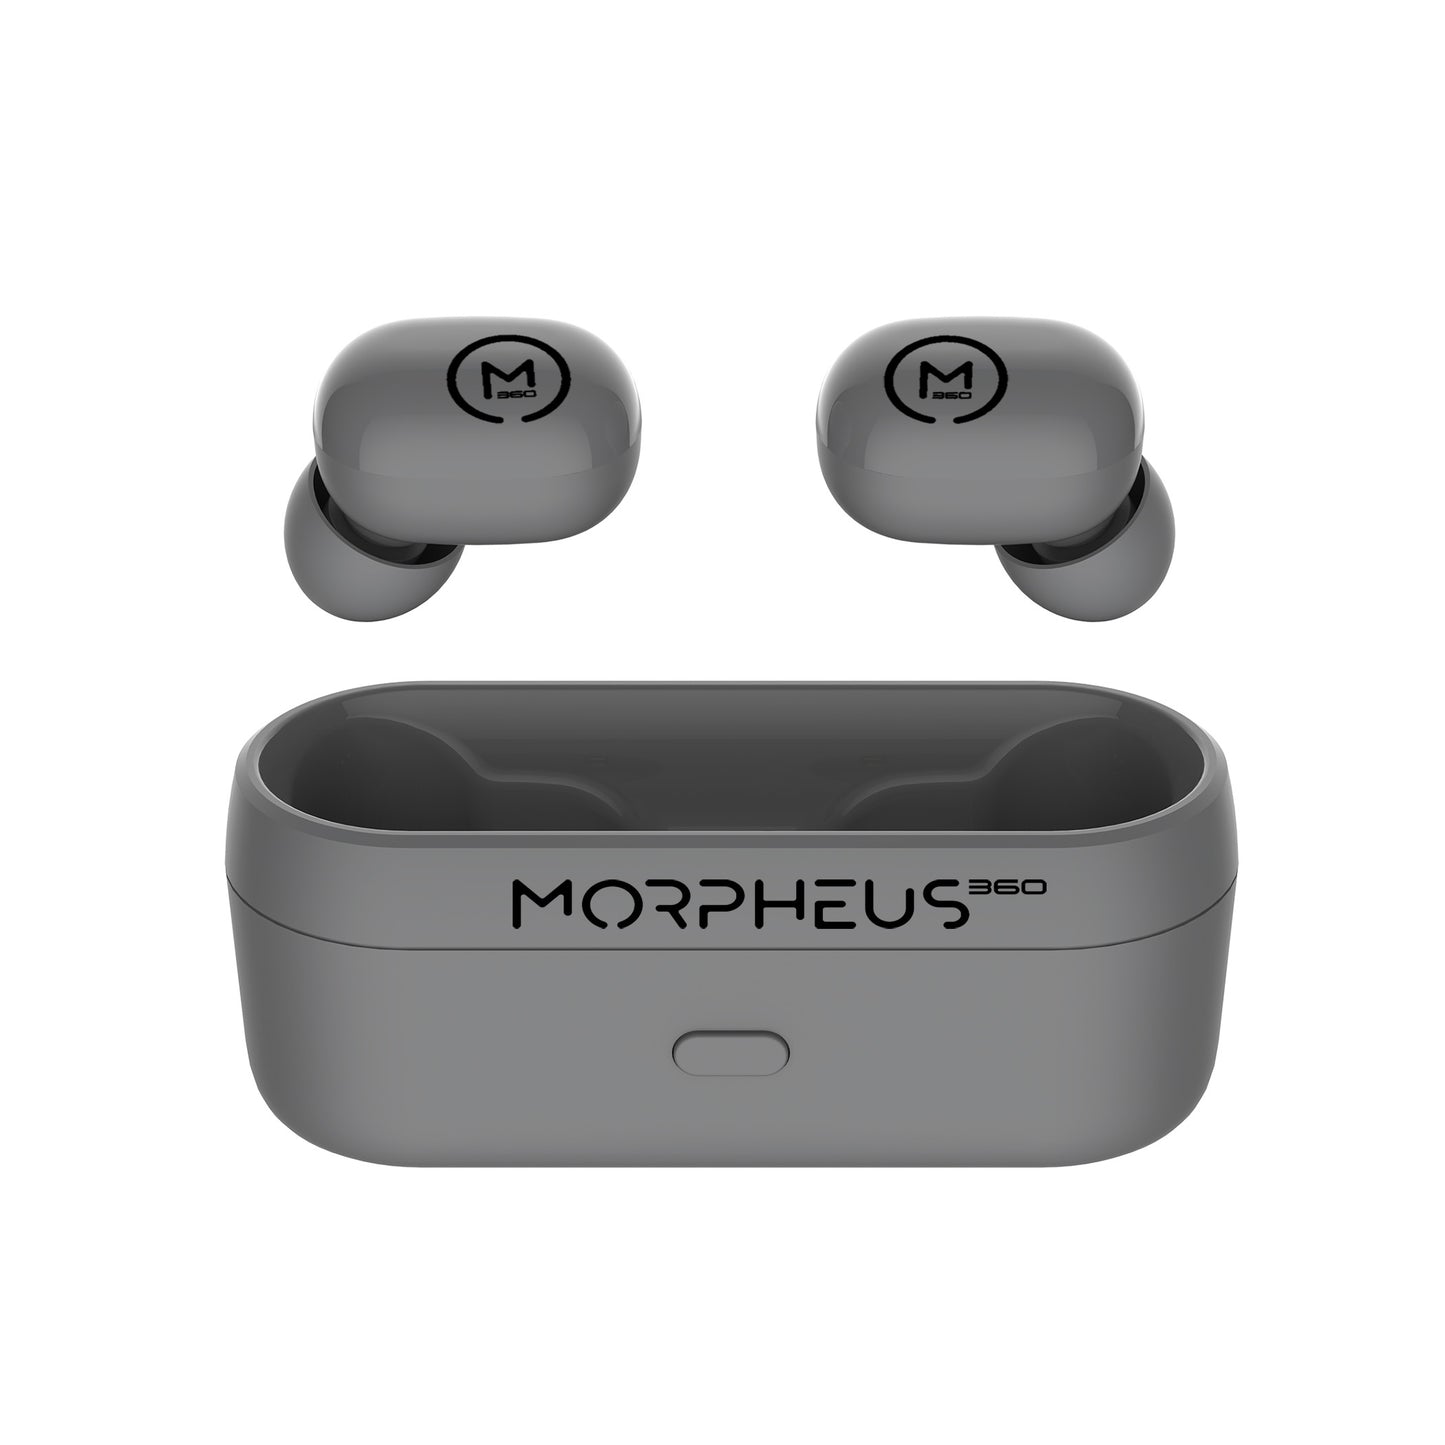 Photo of Morpheus 360 Spire True Wireless Earbuds Gray left and right button earbuds with charging case.